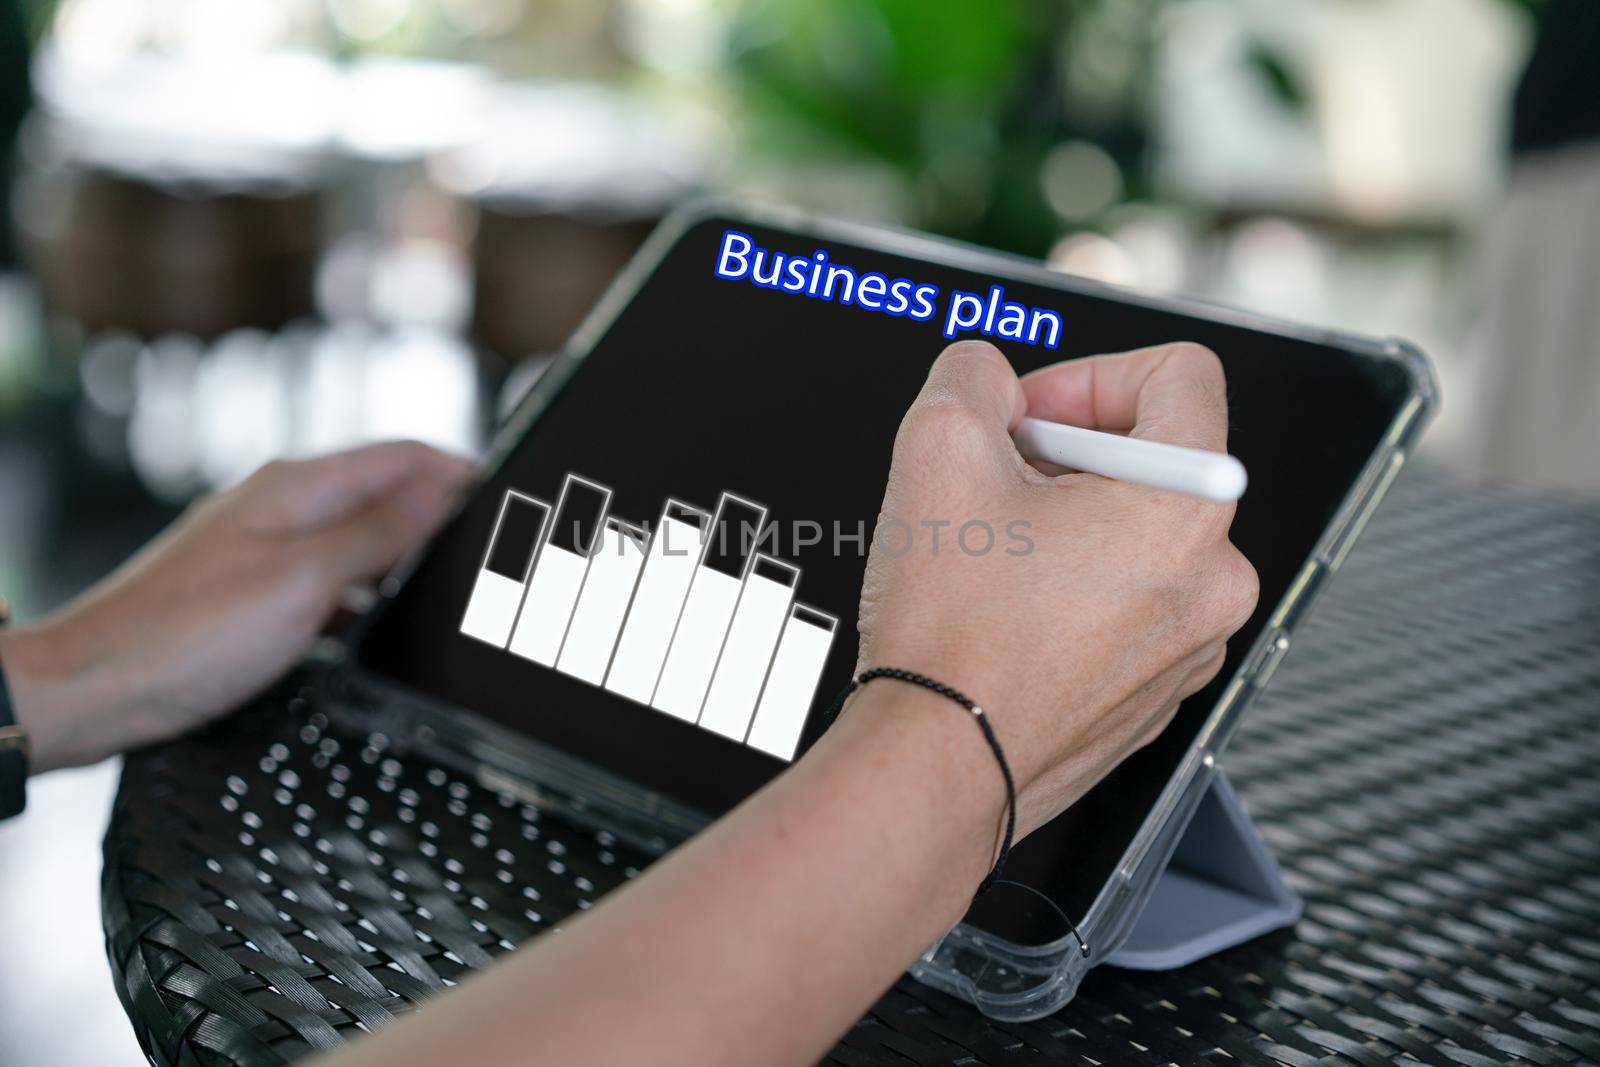 Hand use Tablet for online business plan by Buttus_casso